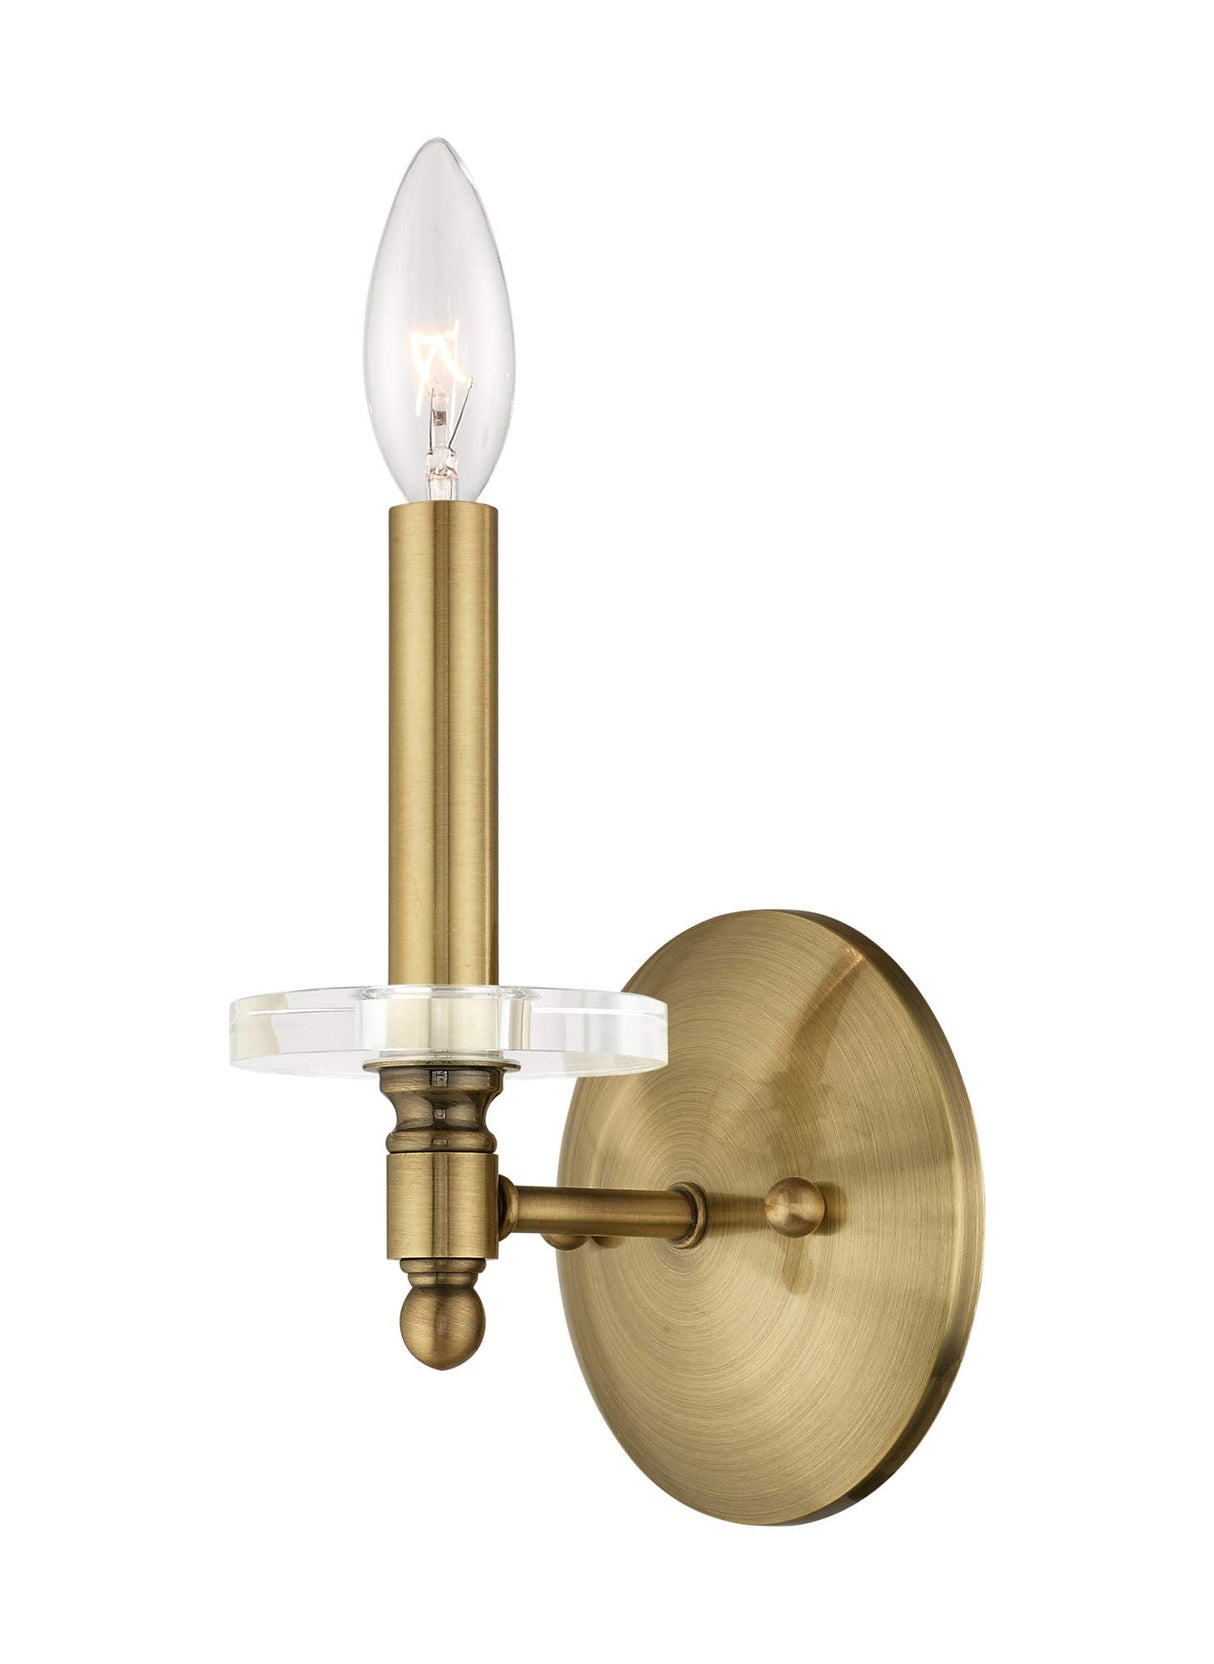 Livex Lighting 42701-01 Bancroft - One Light Wall Sconce, Antique Brass Finish with Clear Bobeche Crystal